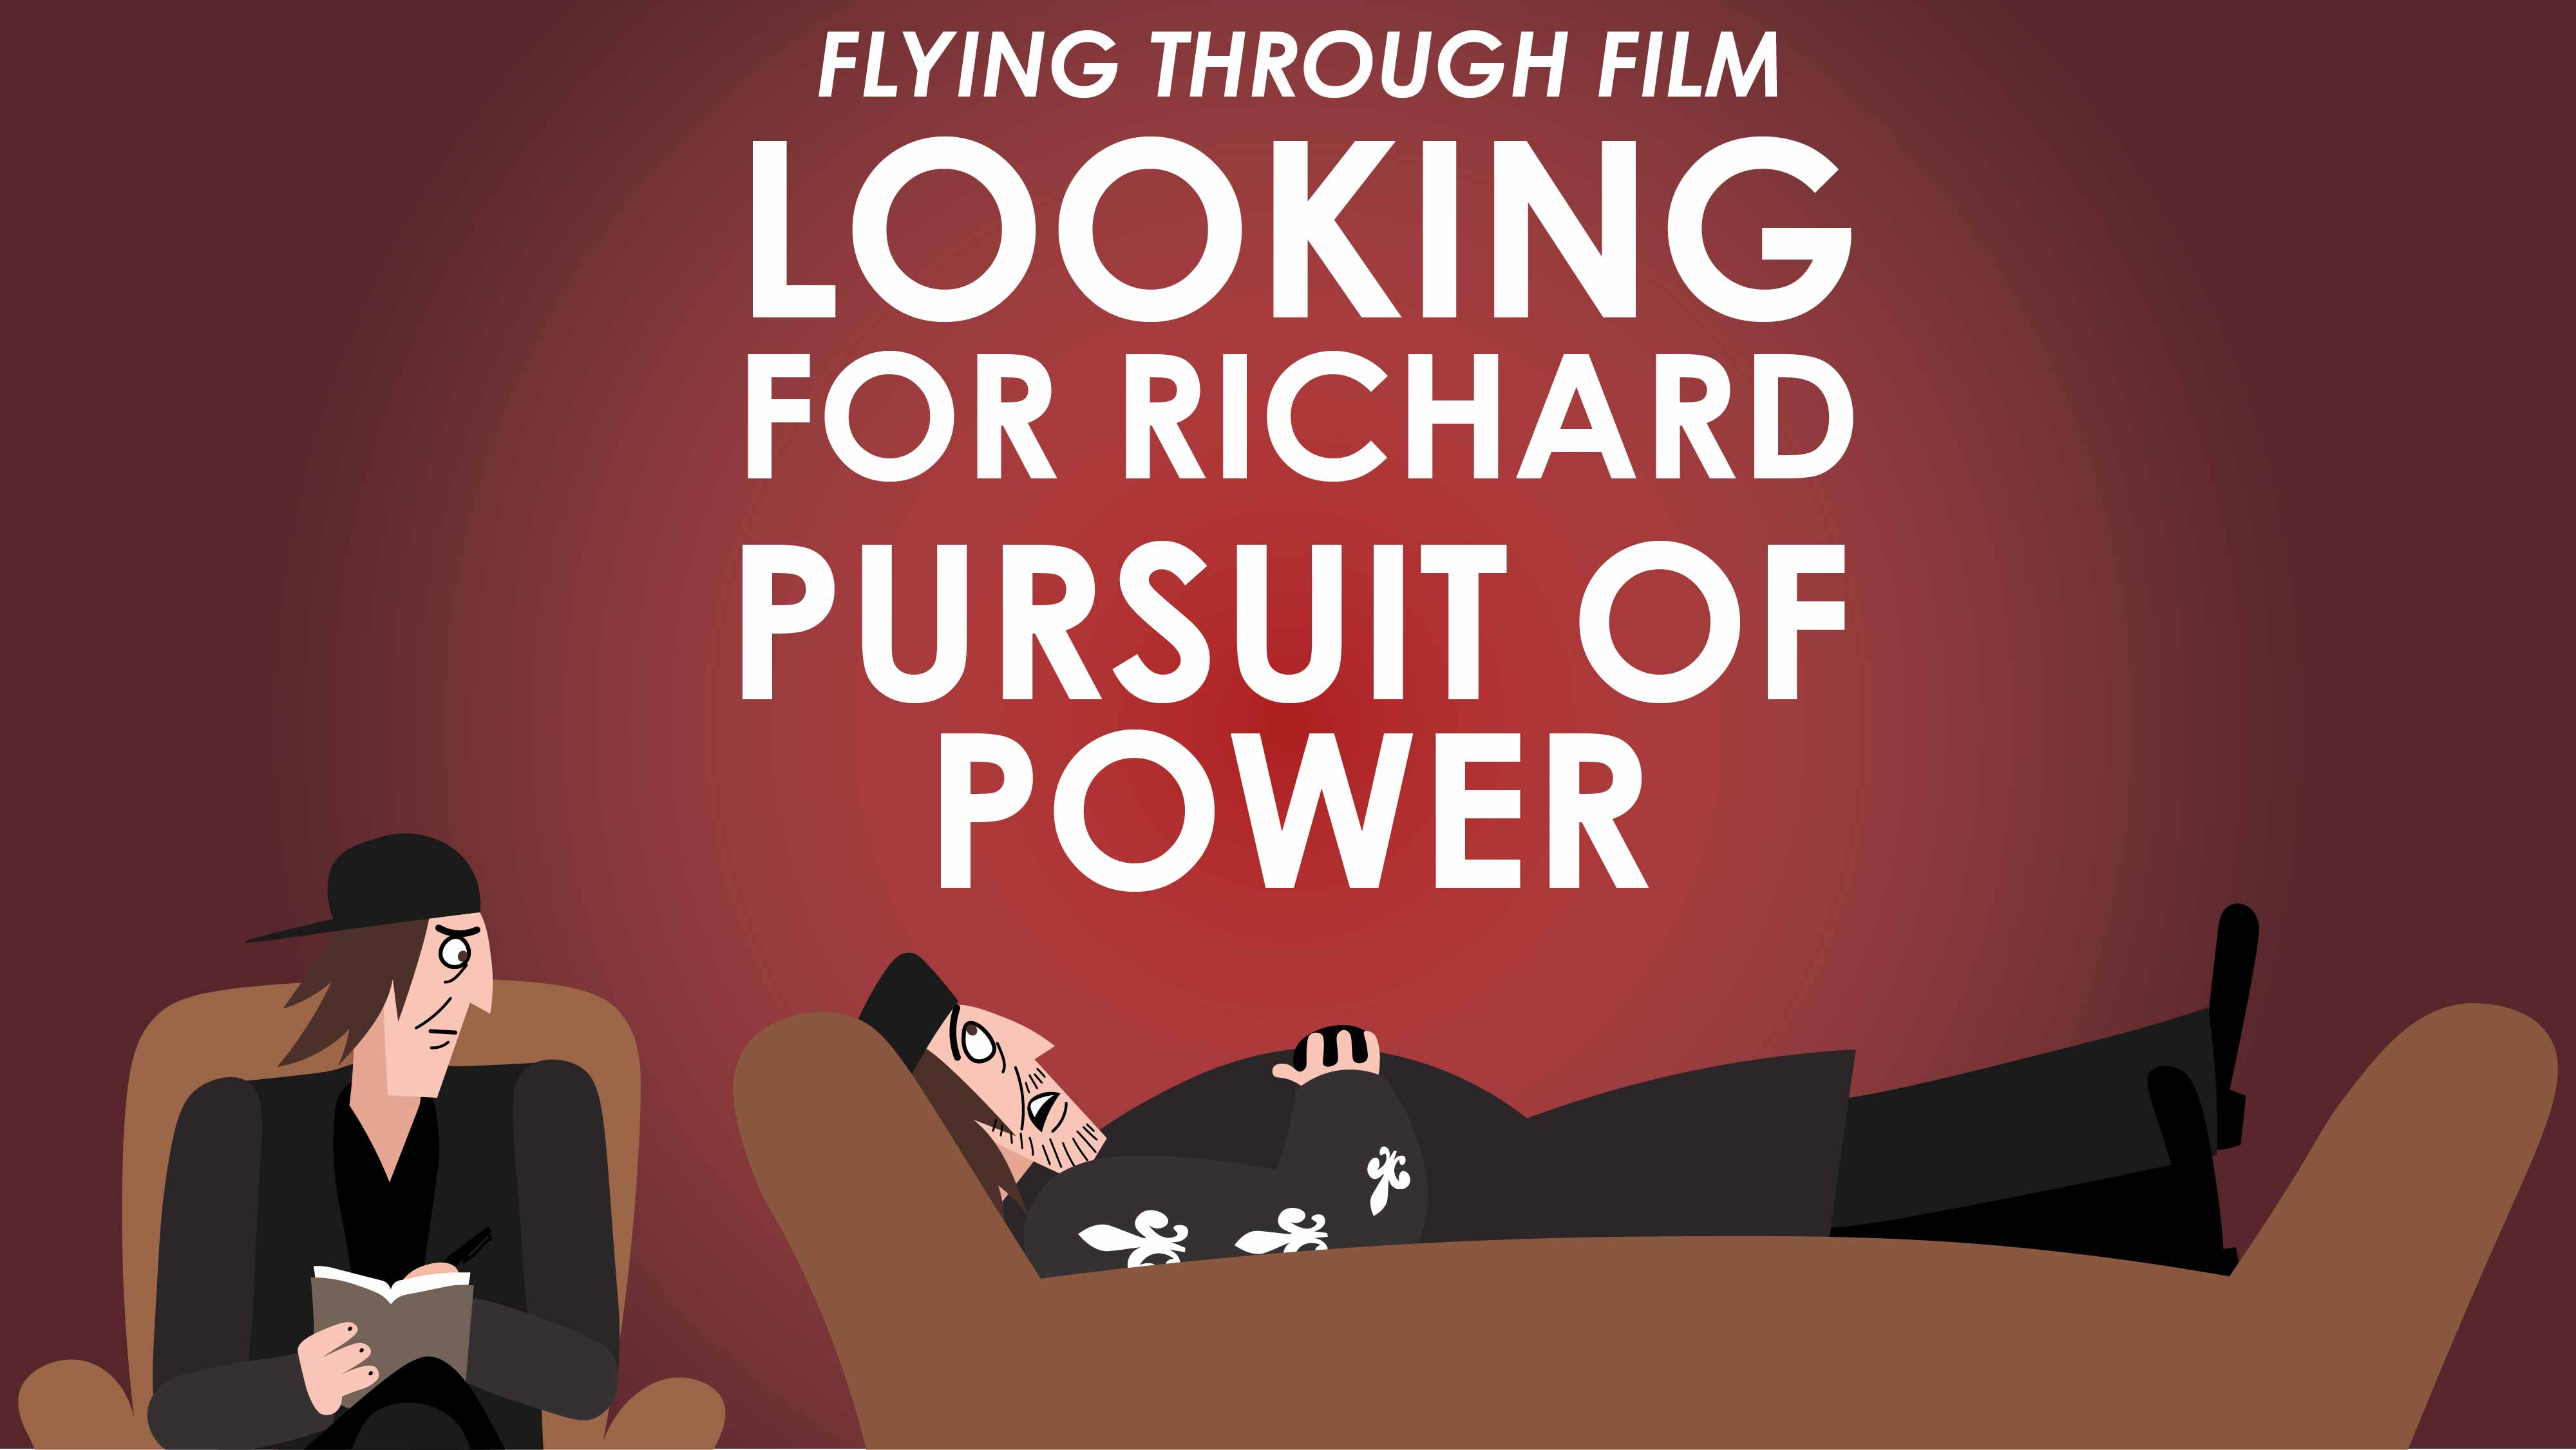 Looking For Richard - Theme of the Pursuit of Power - Flying Through Film Series